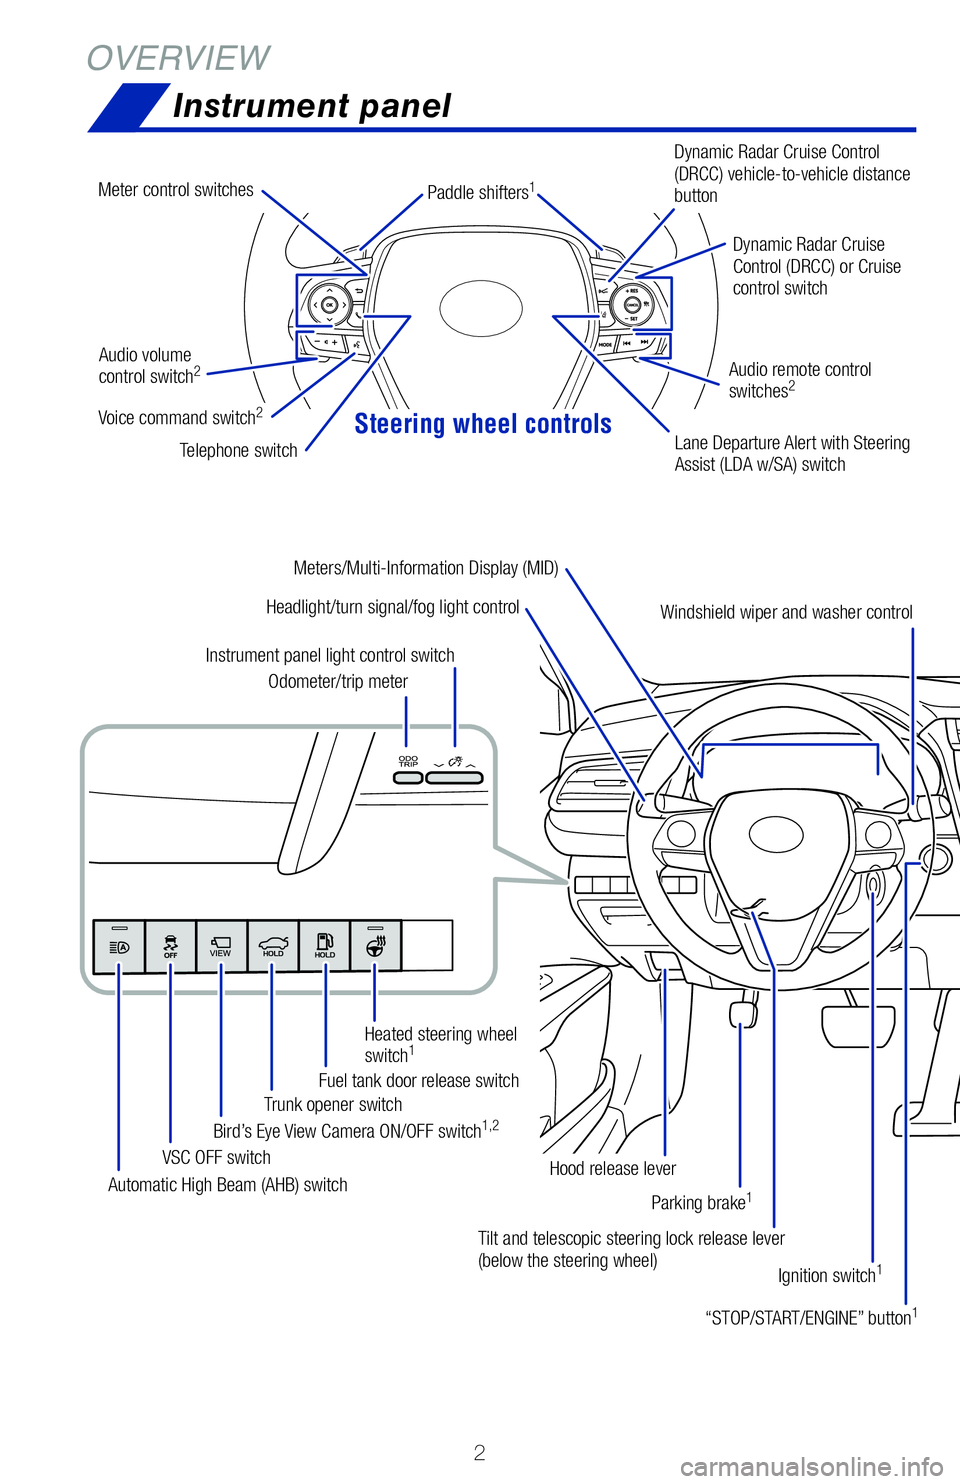 TOYOTA CAMRY 2020  Owners Manual (in English) Steering wheel controls
2
OVERVIEWInstrument panel
Tilt and telescopic steering lock release lever 
(below the steering wheel) Ignition switch
1
Headlight/turn signal/fog light control
Automatic High 